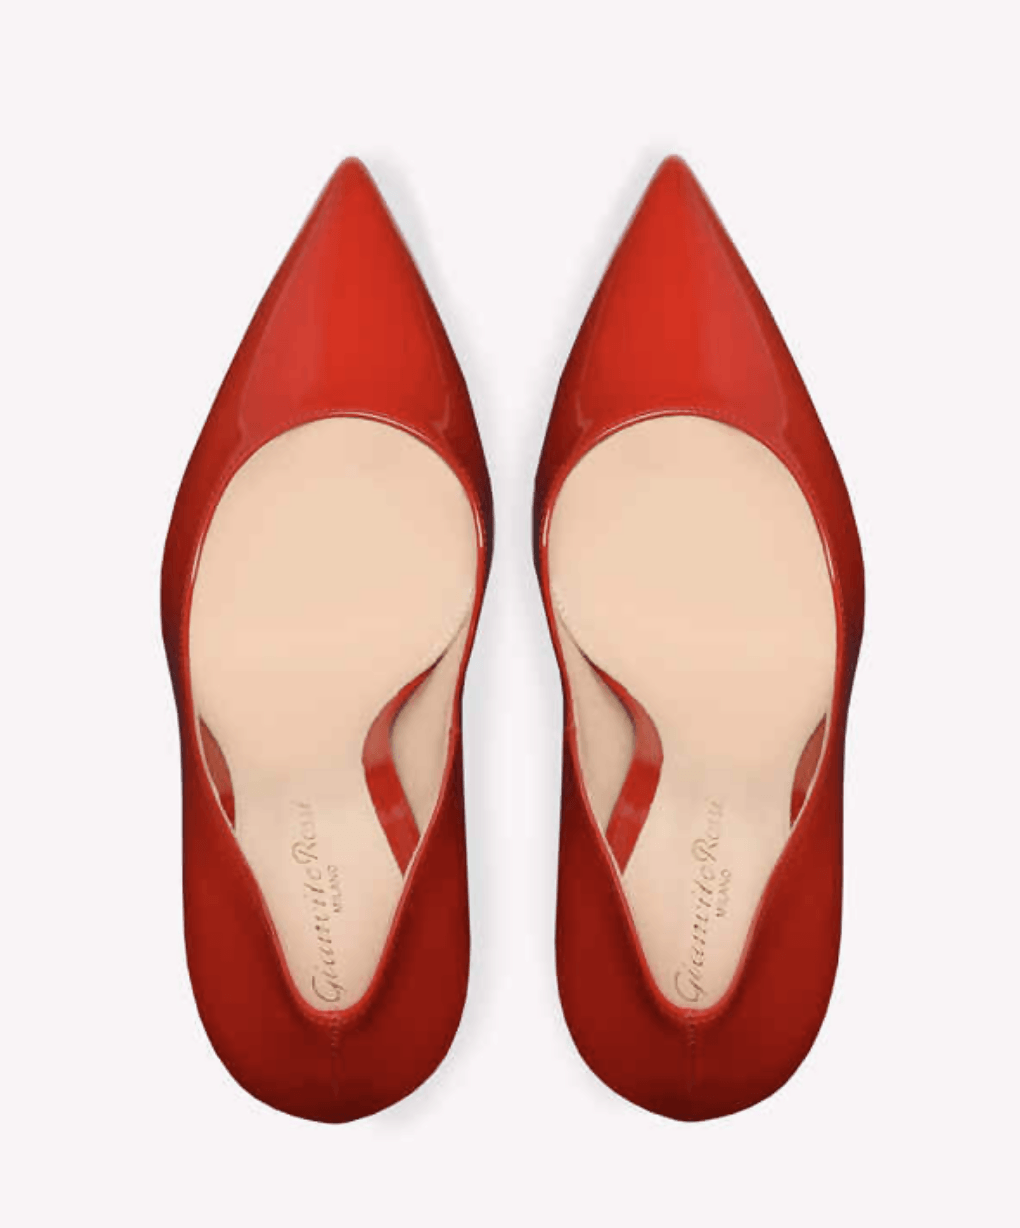 Red Patent Heels - Endless